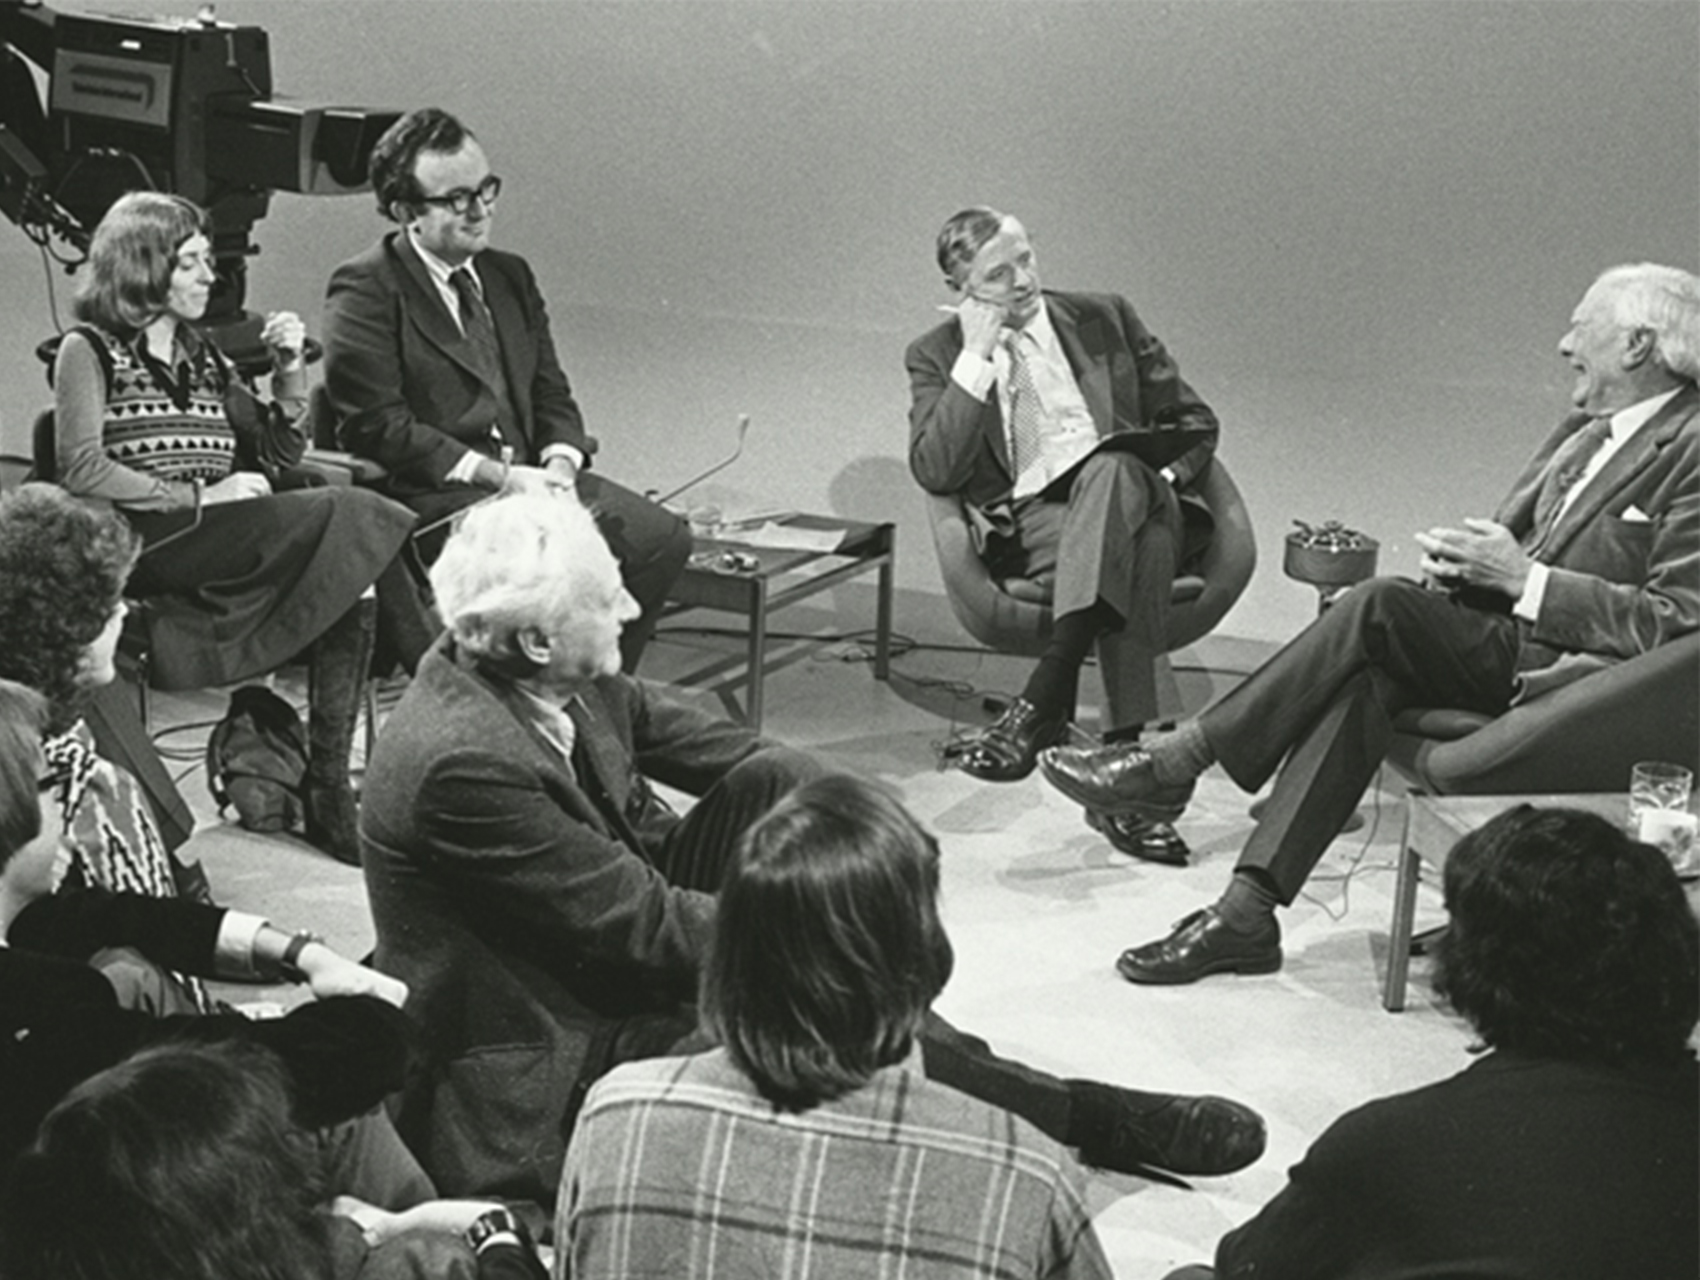 Black and white photo still from Firing Line featuring William F. Buckley